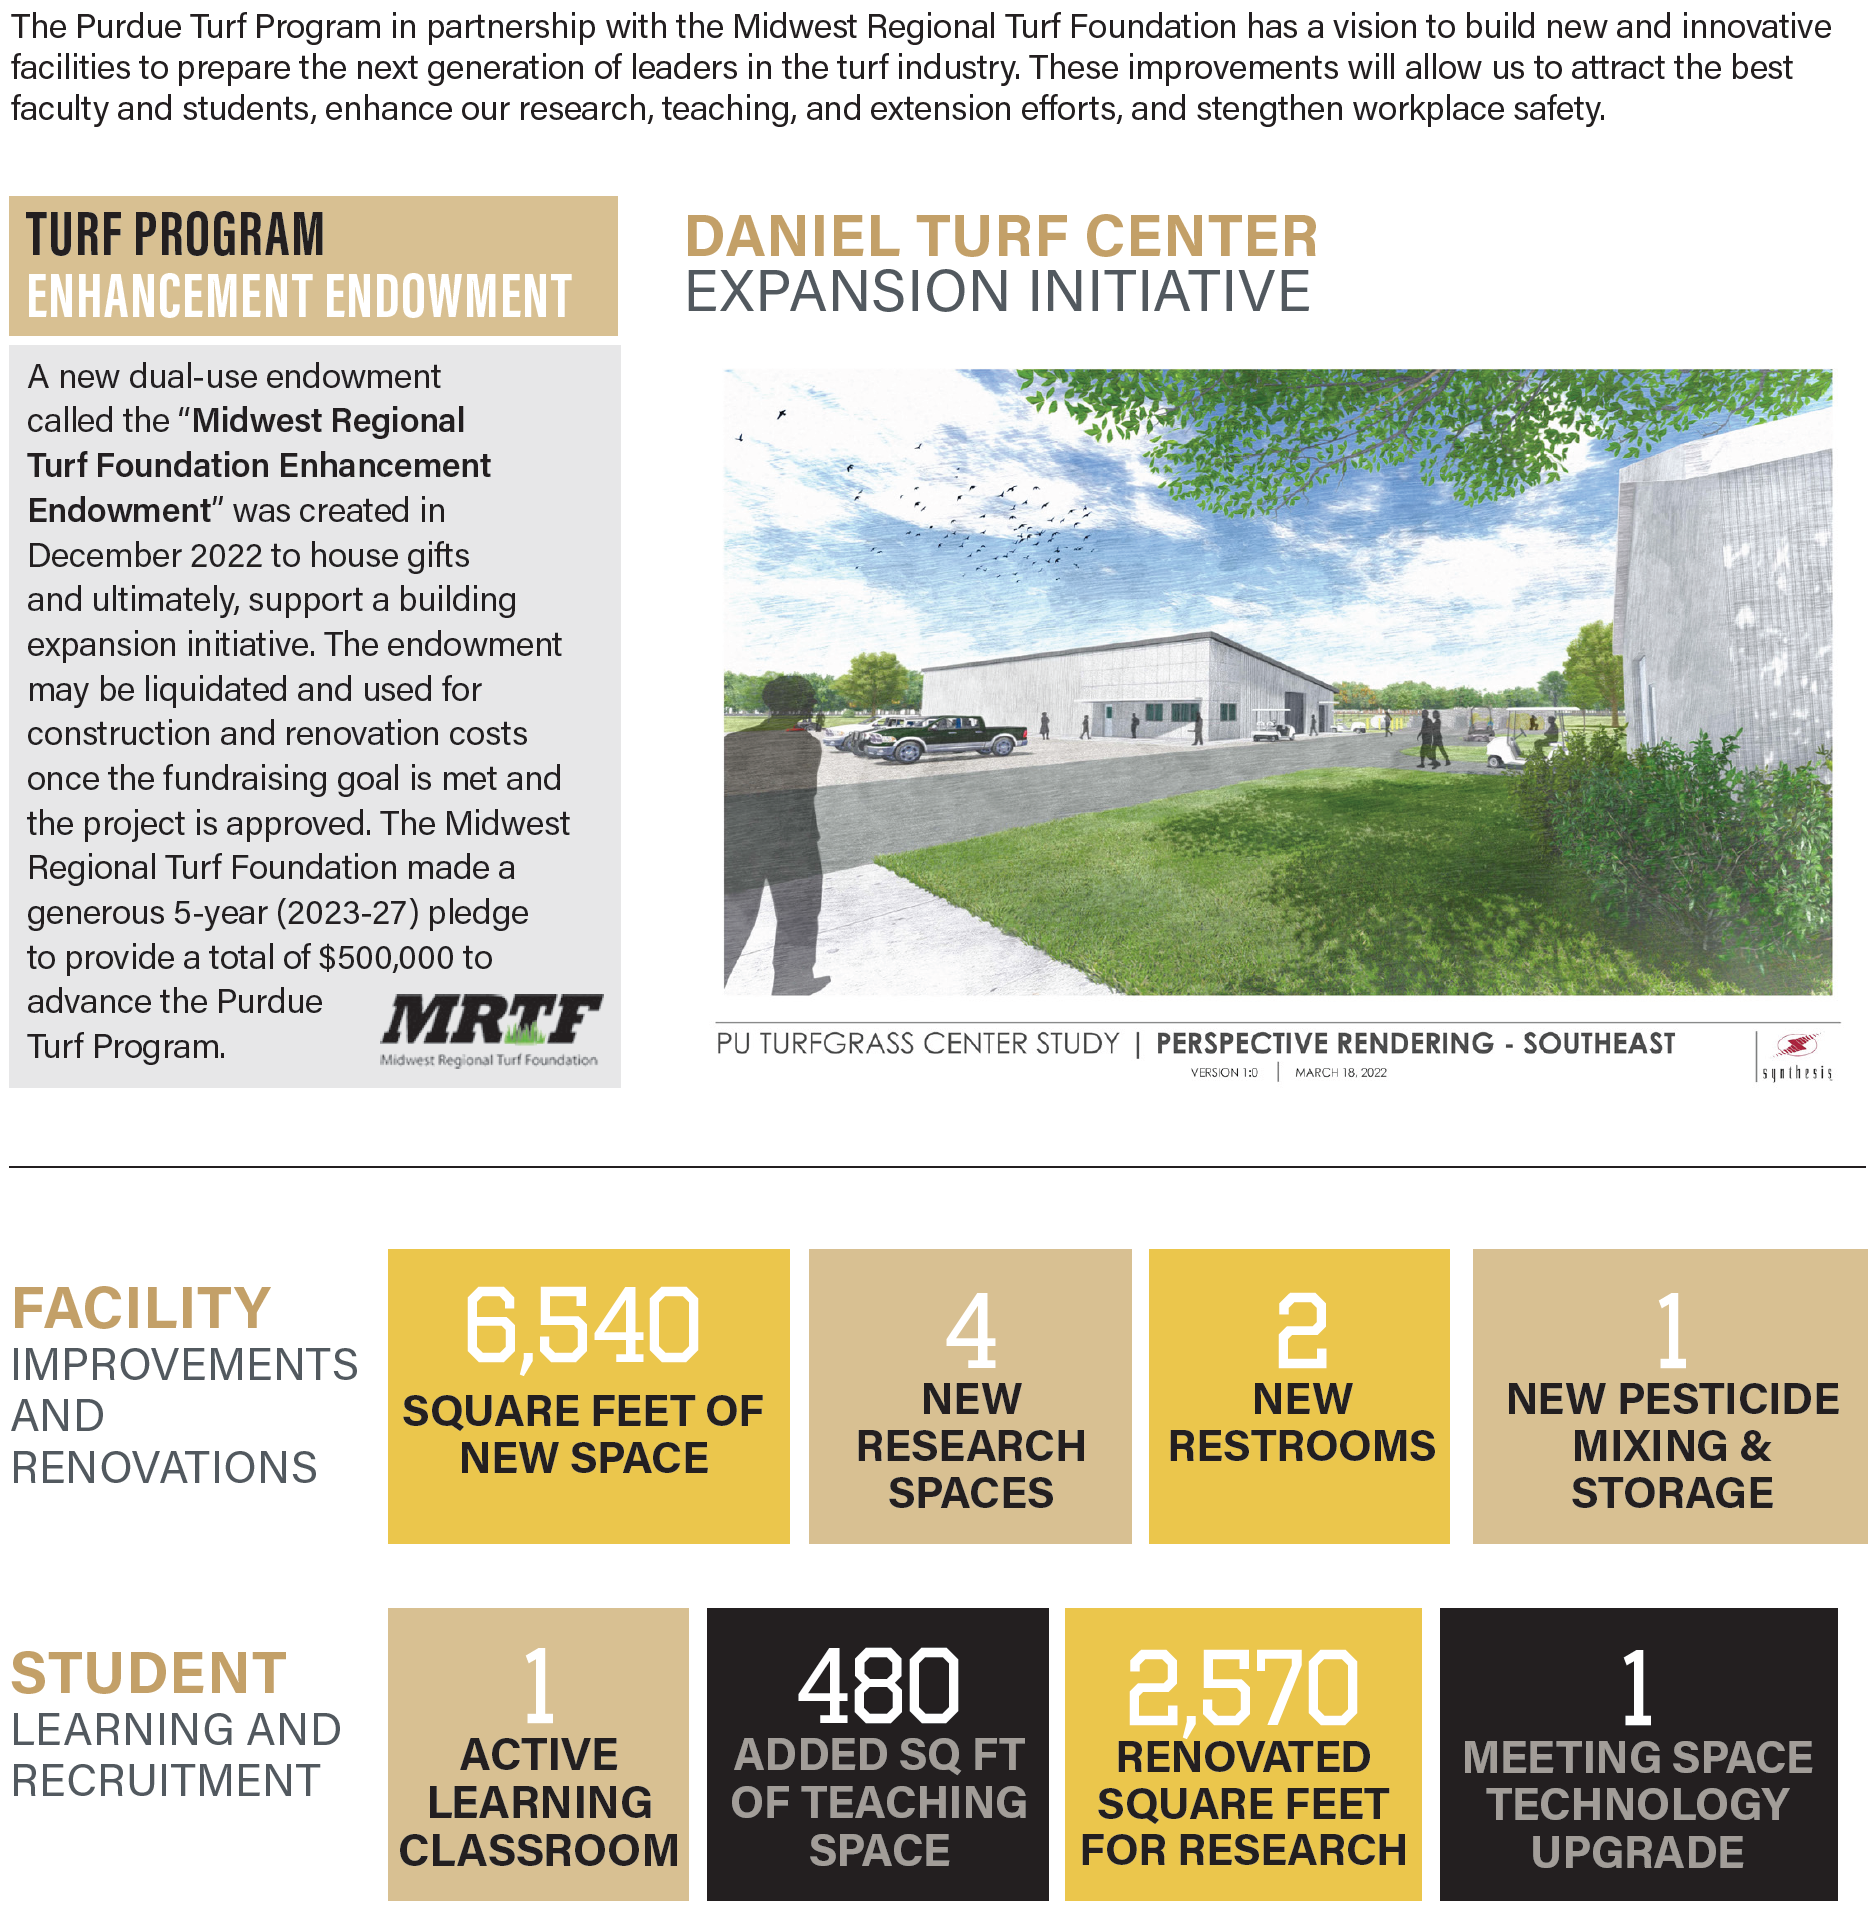 Flyer with sketch and information about the Daniel Turf Center Expansion Initiative.